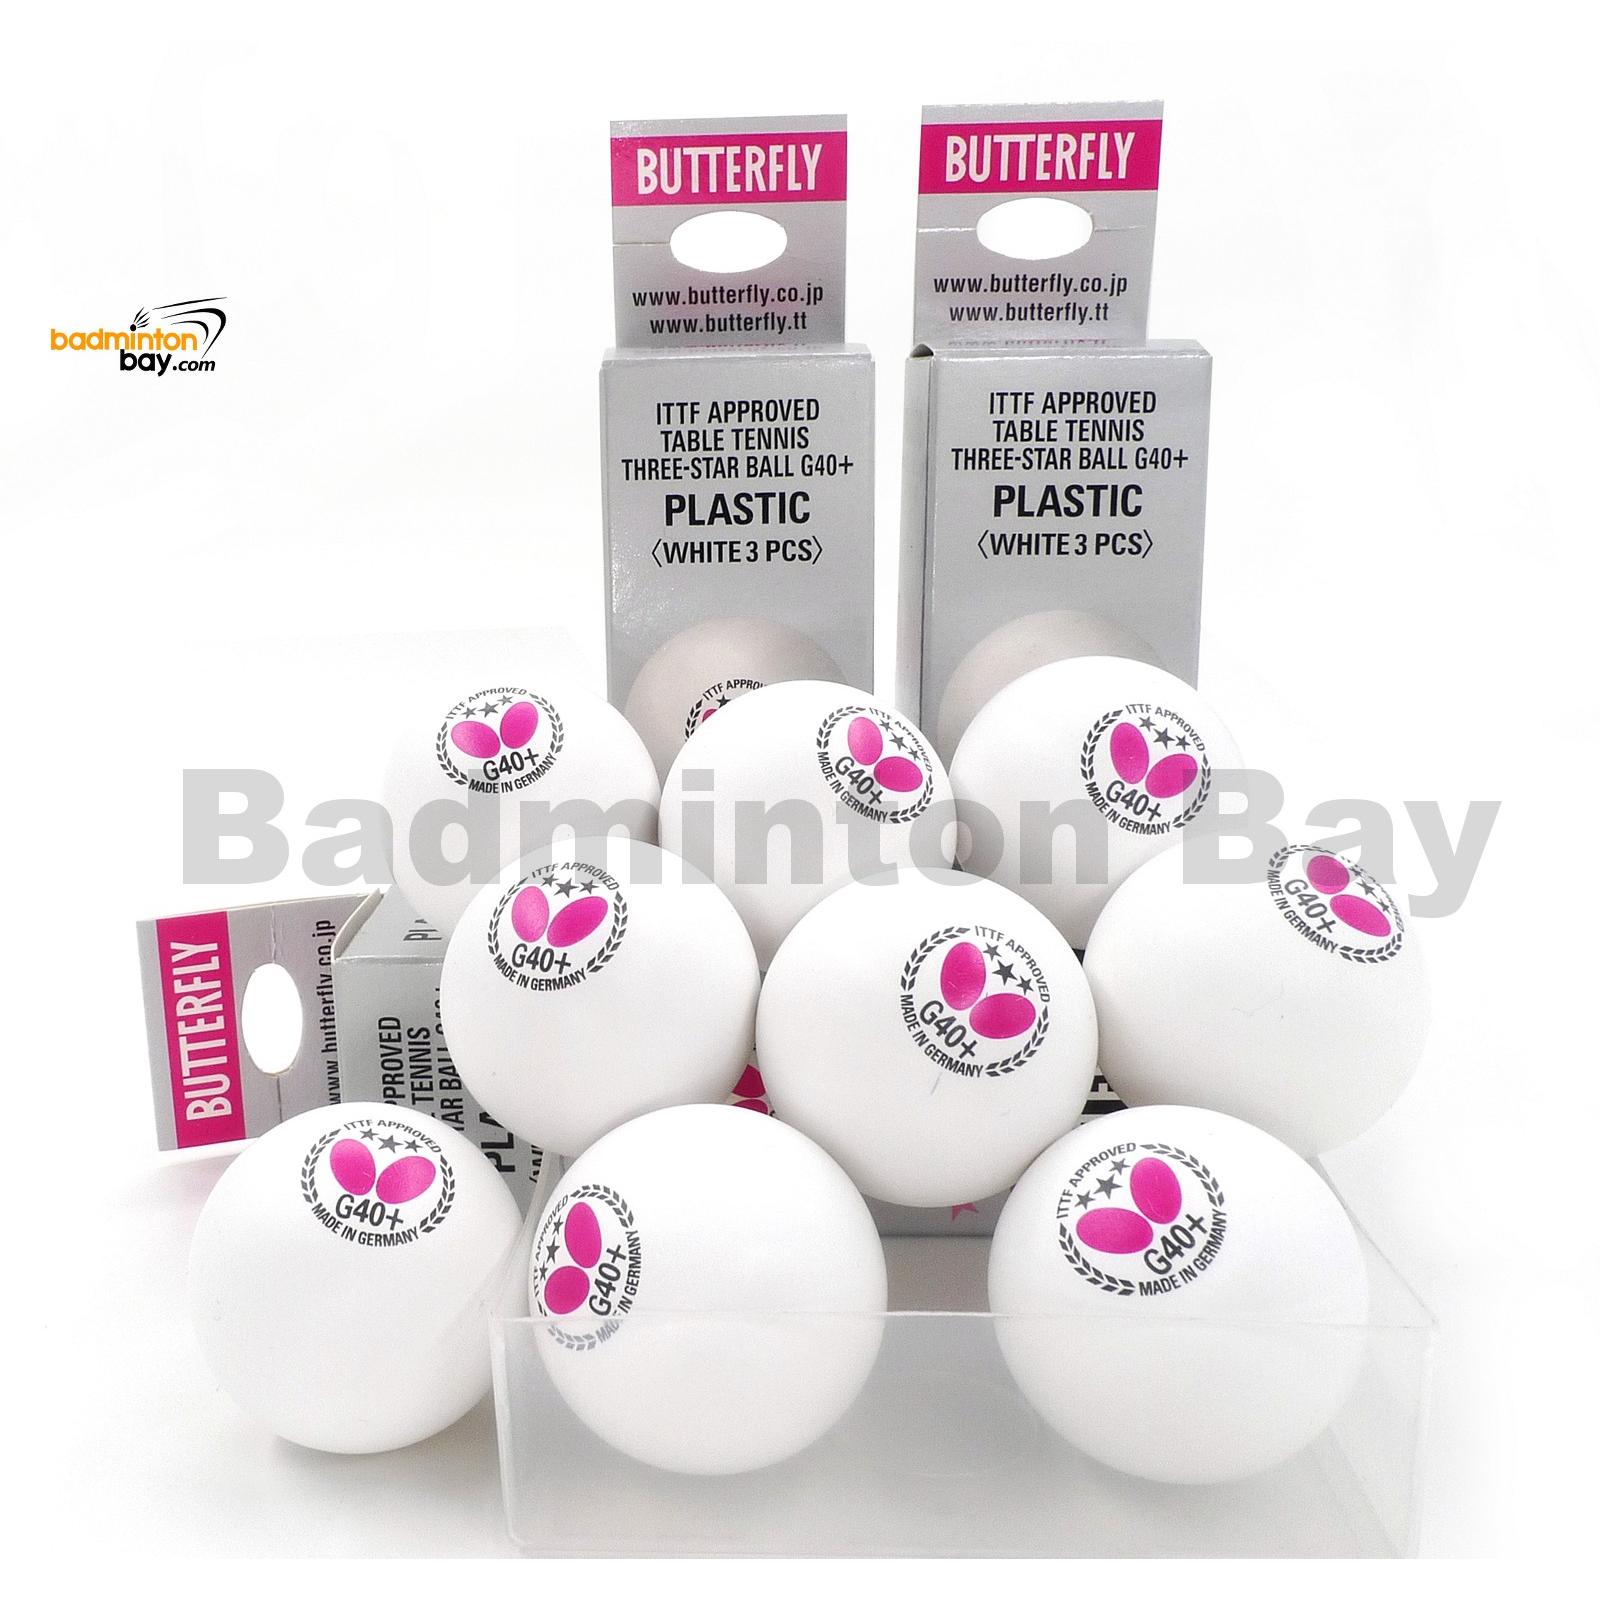 Butterfly Table Tennis 3balls White ITTF approved ping pong G40+ 3-Star Ball 